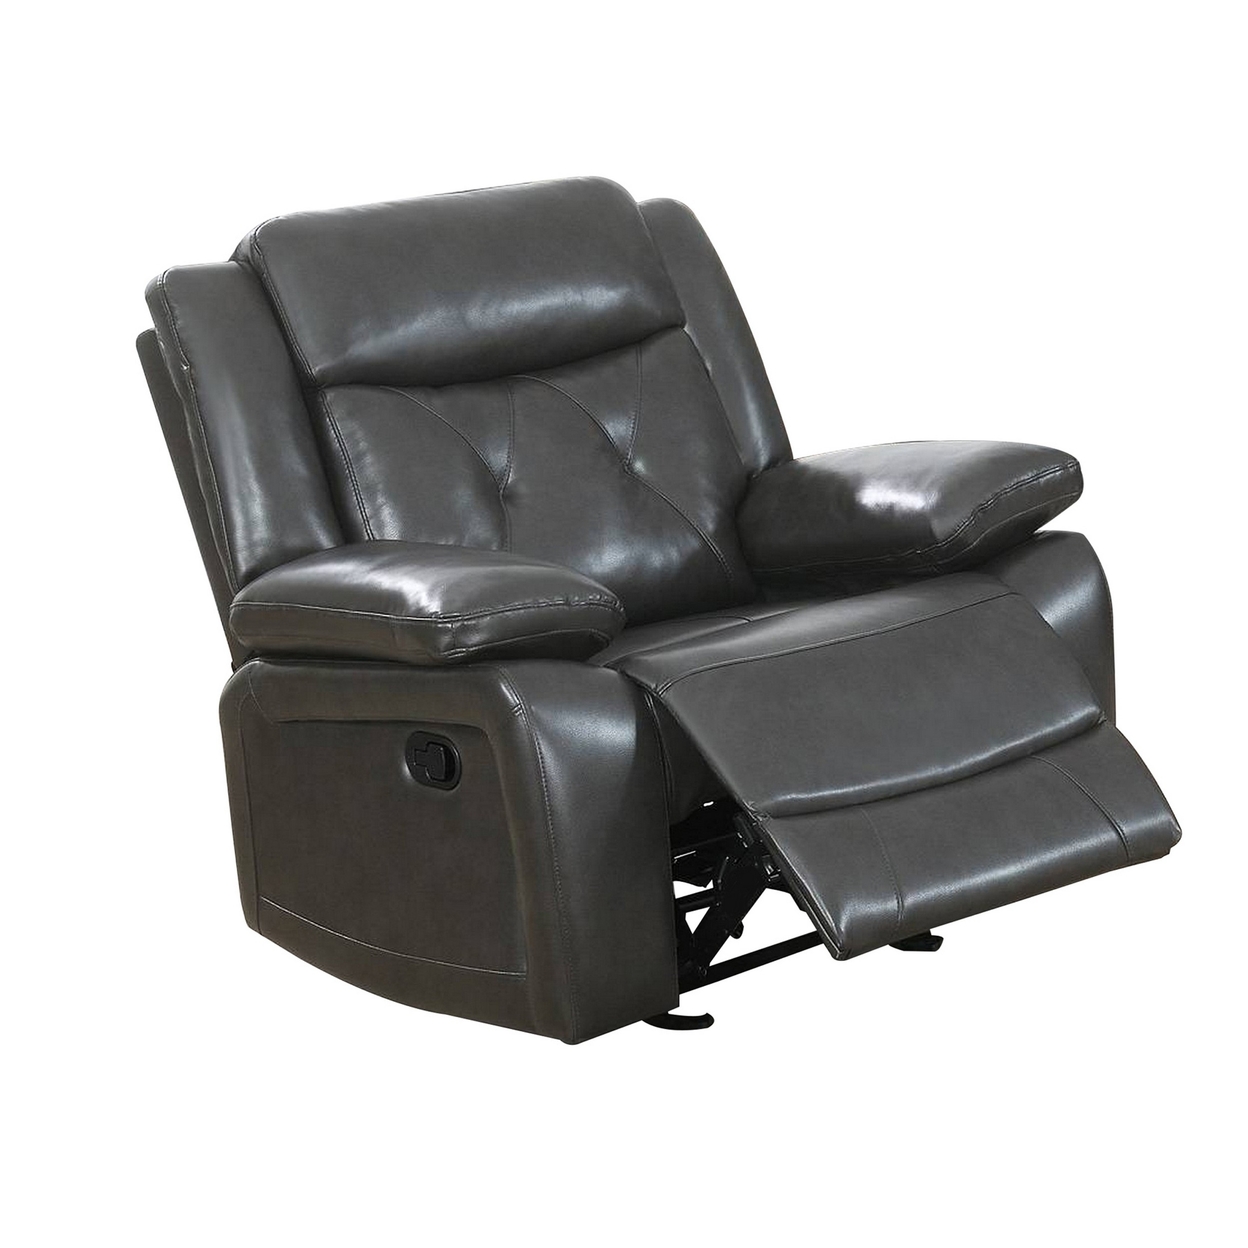 Nuna 40 Inch Power Recliner Chair With Manual Pull Tab, Brown Faux Leather- Saltoro Sherpi